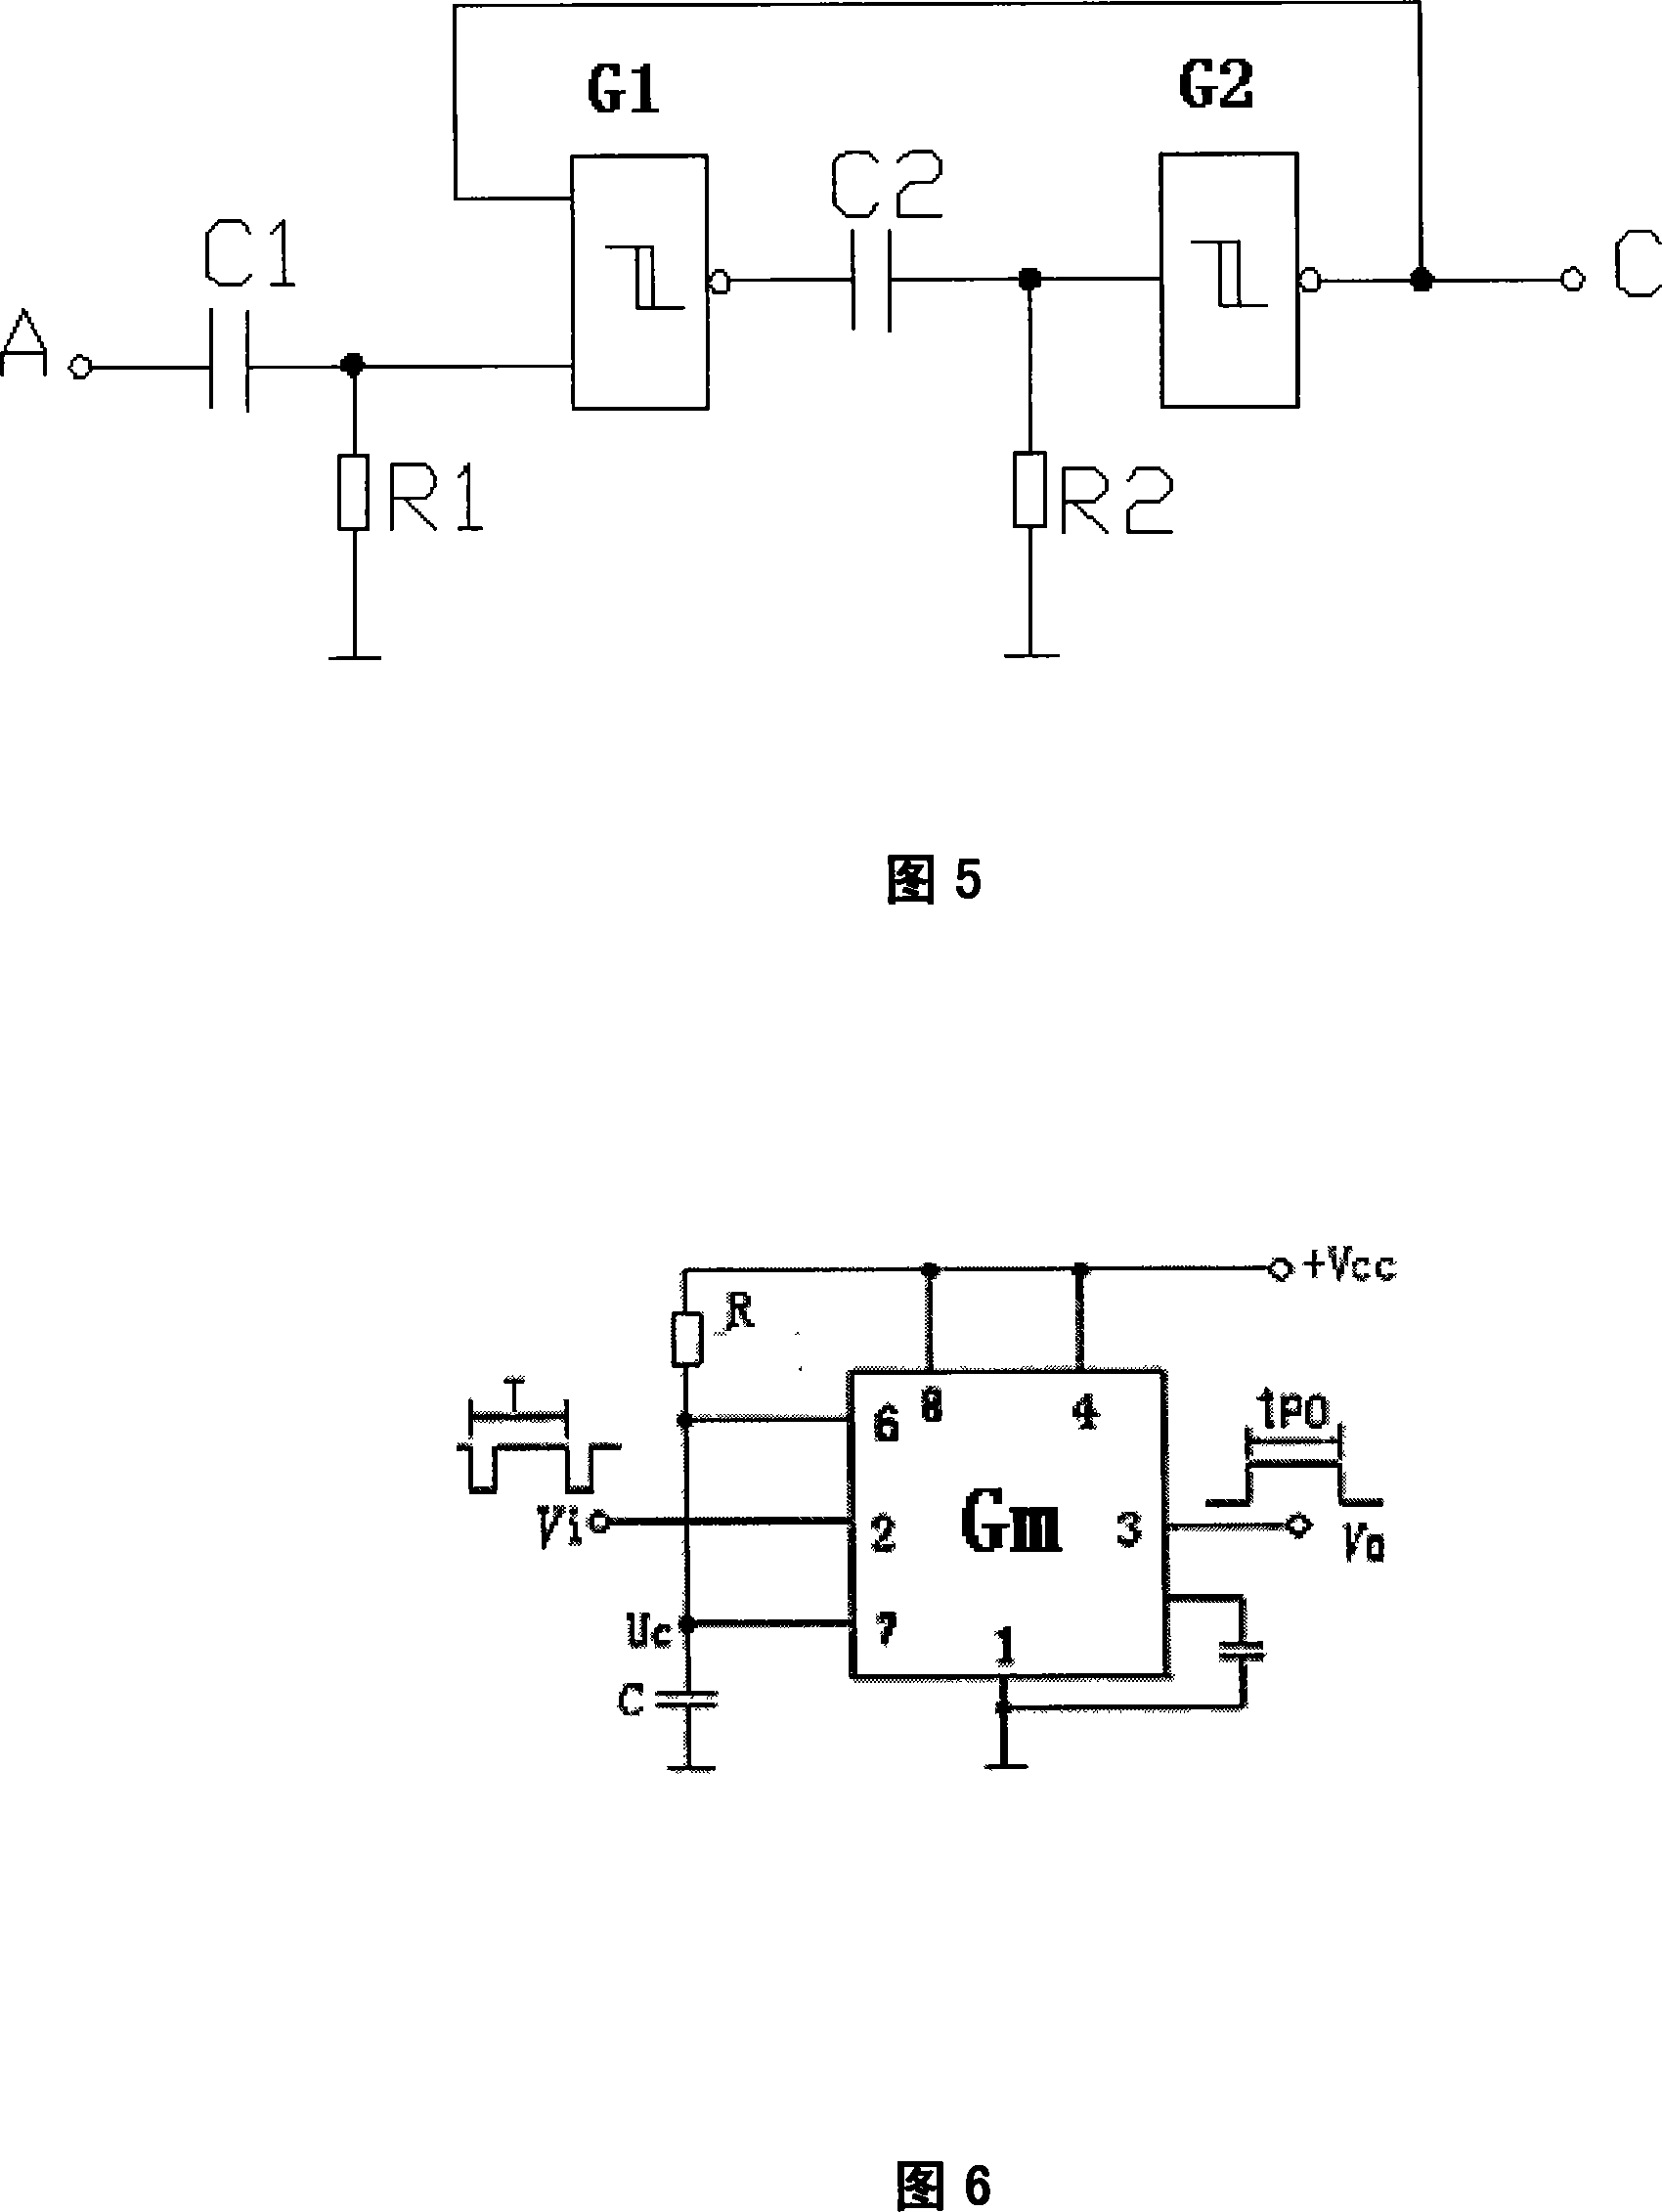 A controllable silicon compound switch with protection device